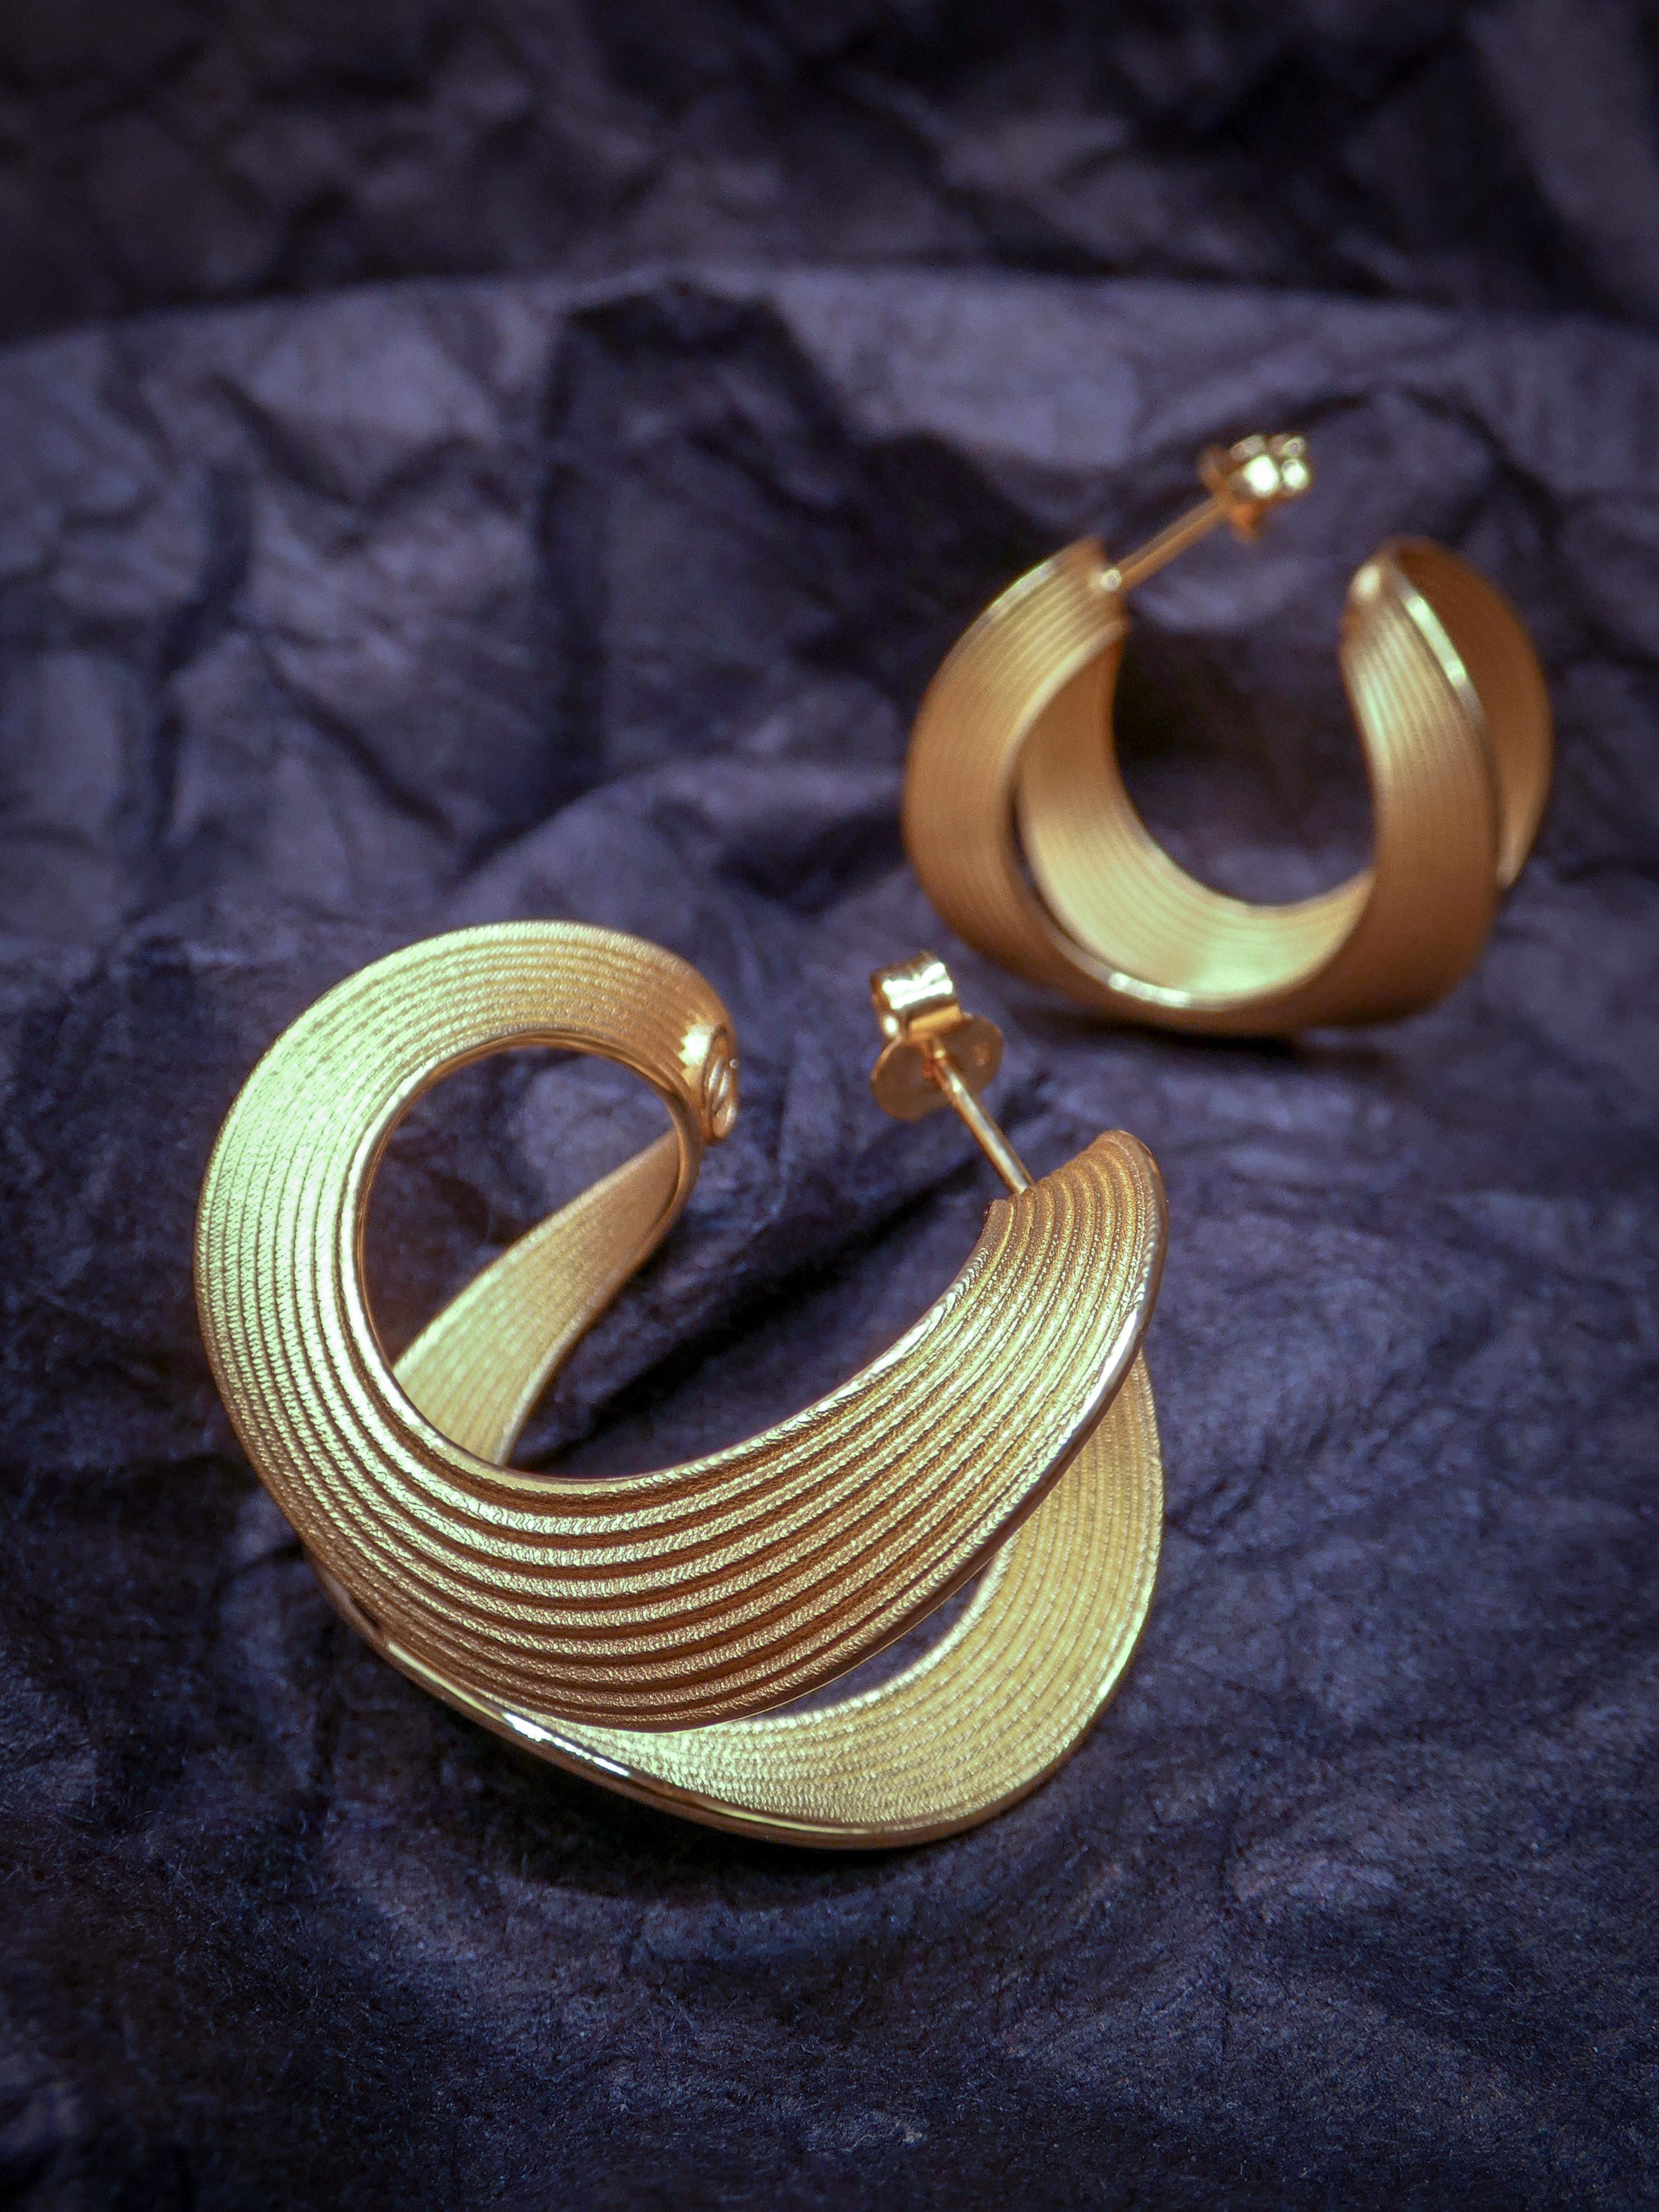 30 mm diameter beautiful ribbon hoop earrings crafted in polished and raw solid gold 14k.
Available in yellow gold, rose gold and white gold 14K and 18k on request.
The approximate total weight is 15 grams in 18k 
The production time of this jewel